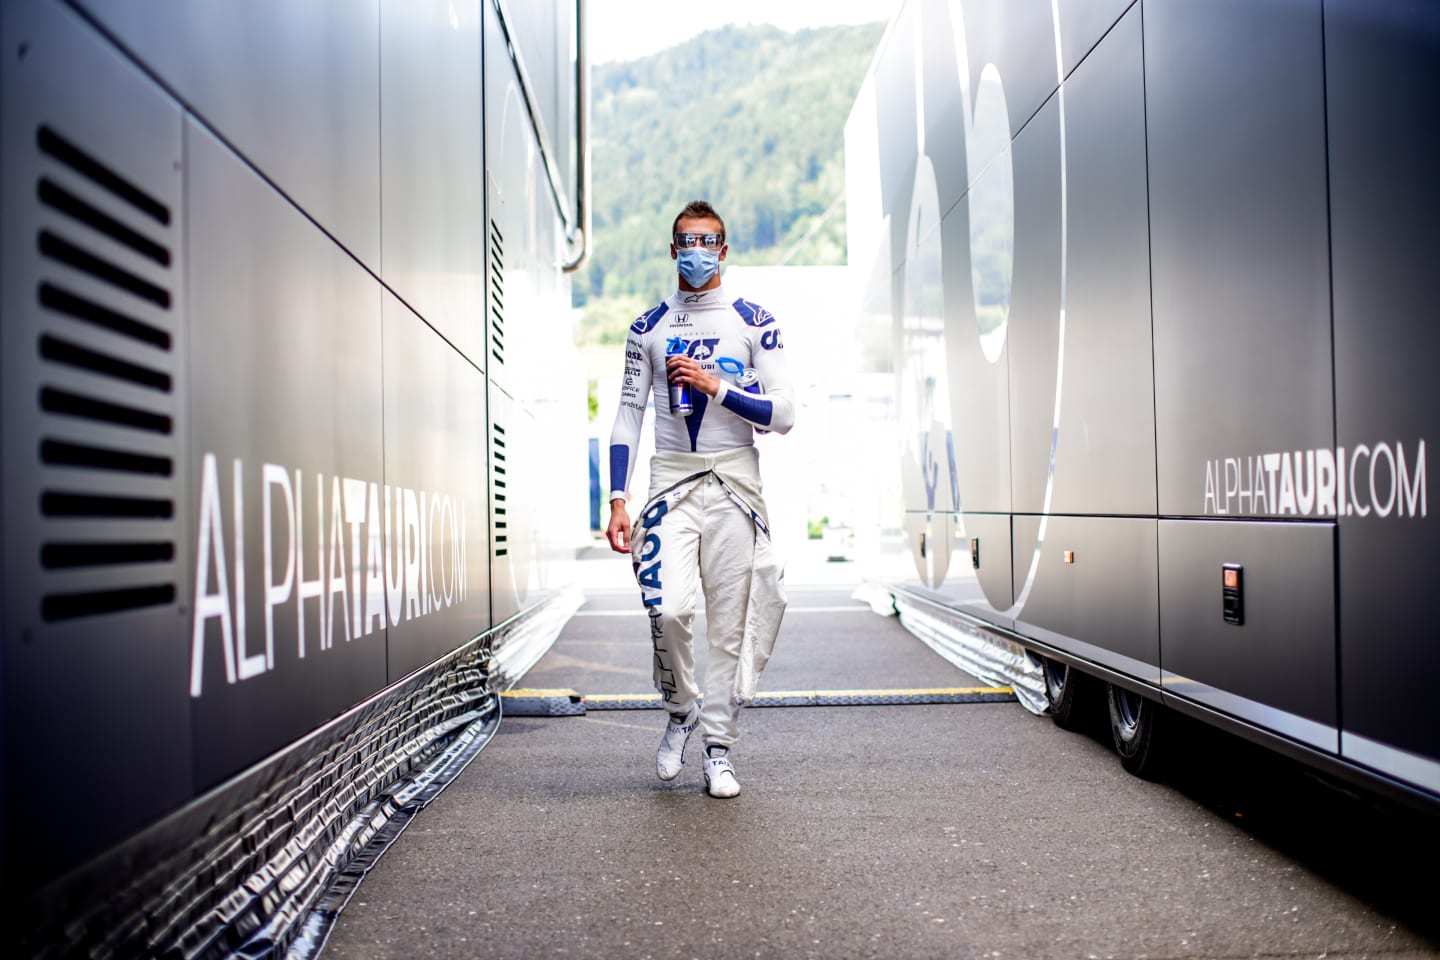 SPIELBERG, AUSTRIA - JULY 10: Daniil Kvyat of Scuderia AlphaTauri and Russia during practice for the F1 Grand Prix of Styria at Red Bull Ring on July 10, 2020 in Spielberg, Austria. (Photo by Peter Fox/Getty Images)